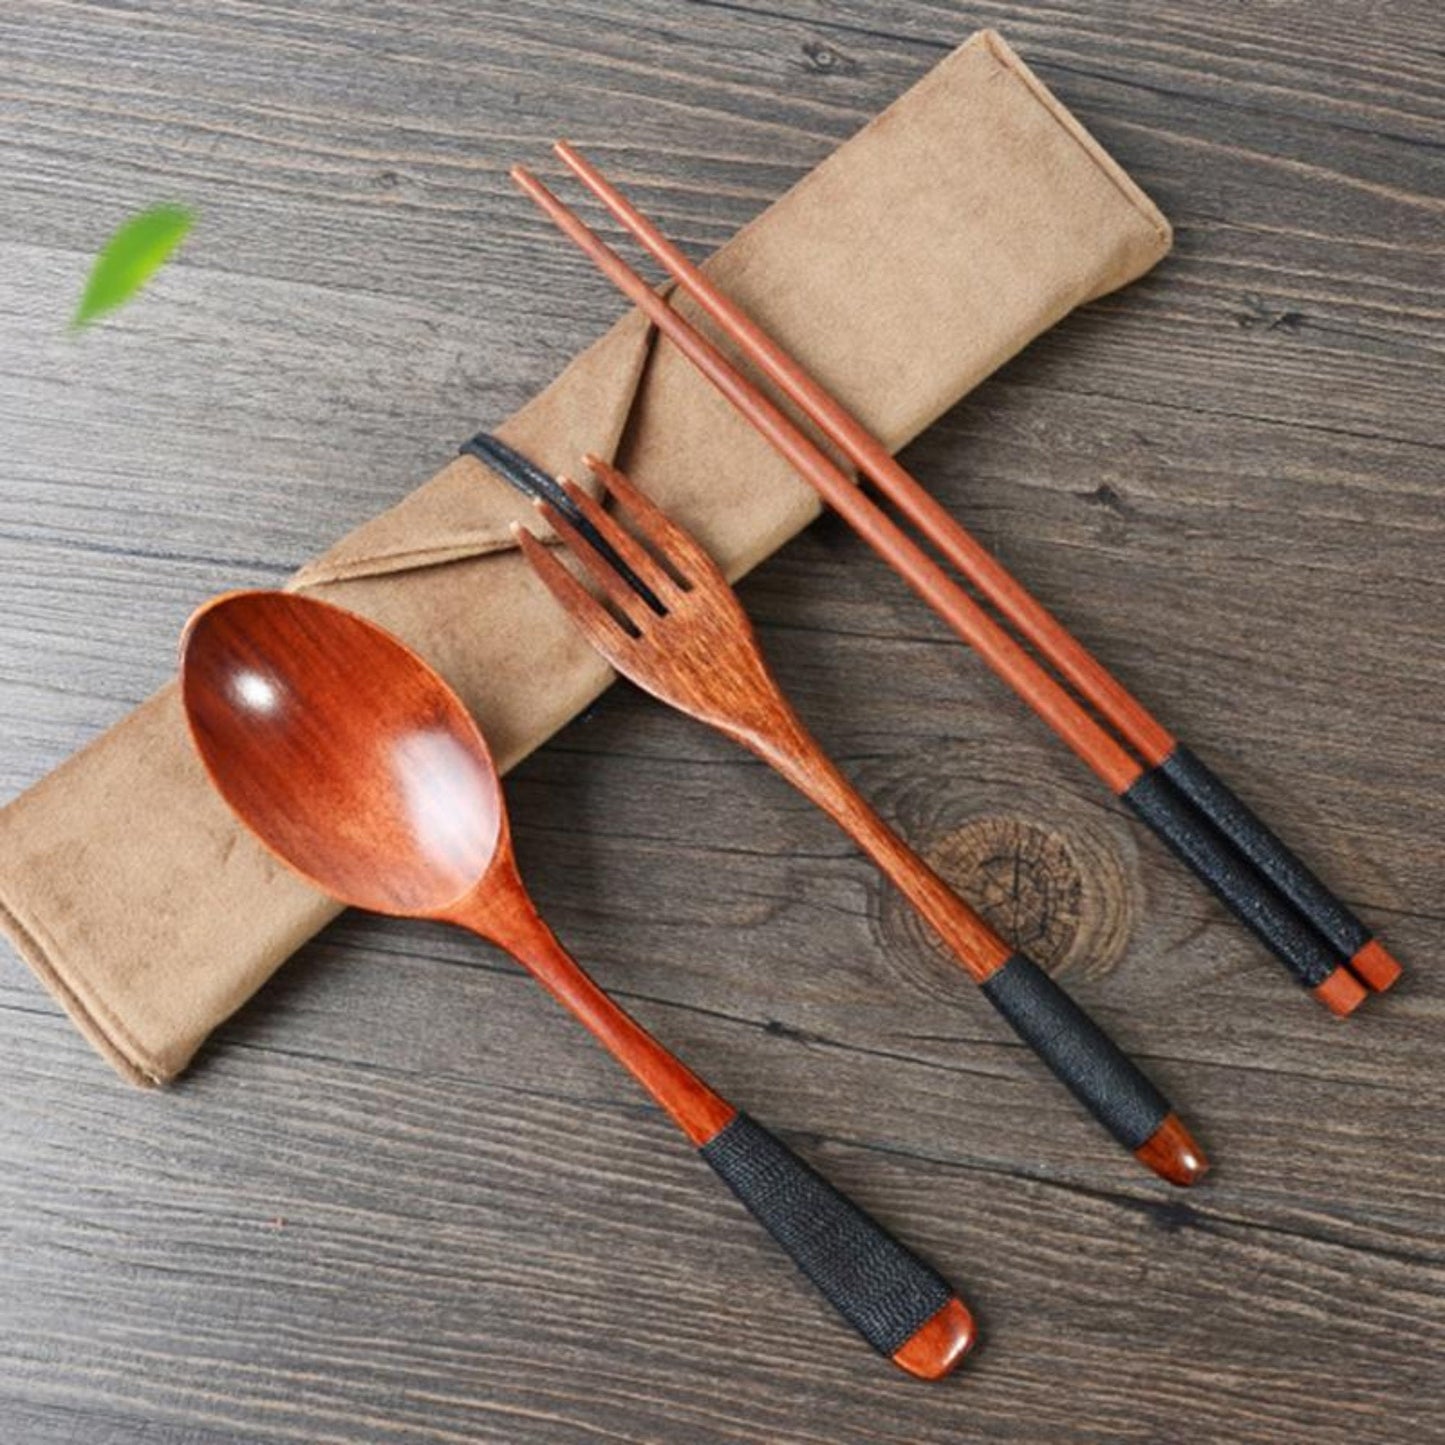 Japanese Wood Cooking Utensils With Case | Spoon Set, Natural wooden - -